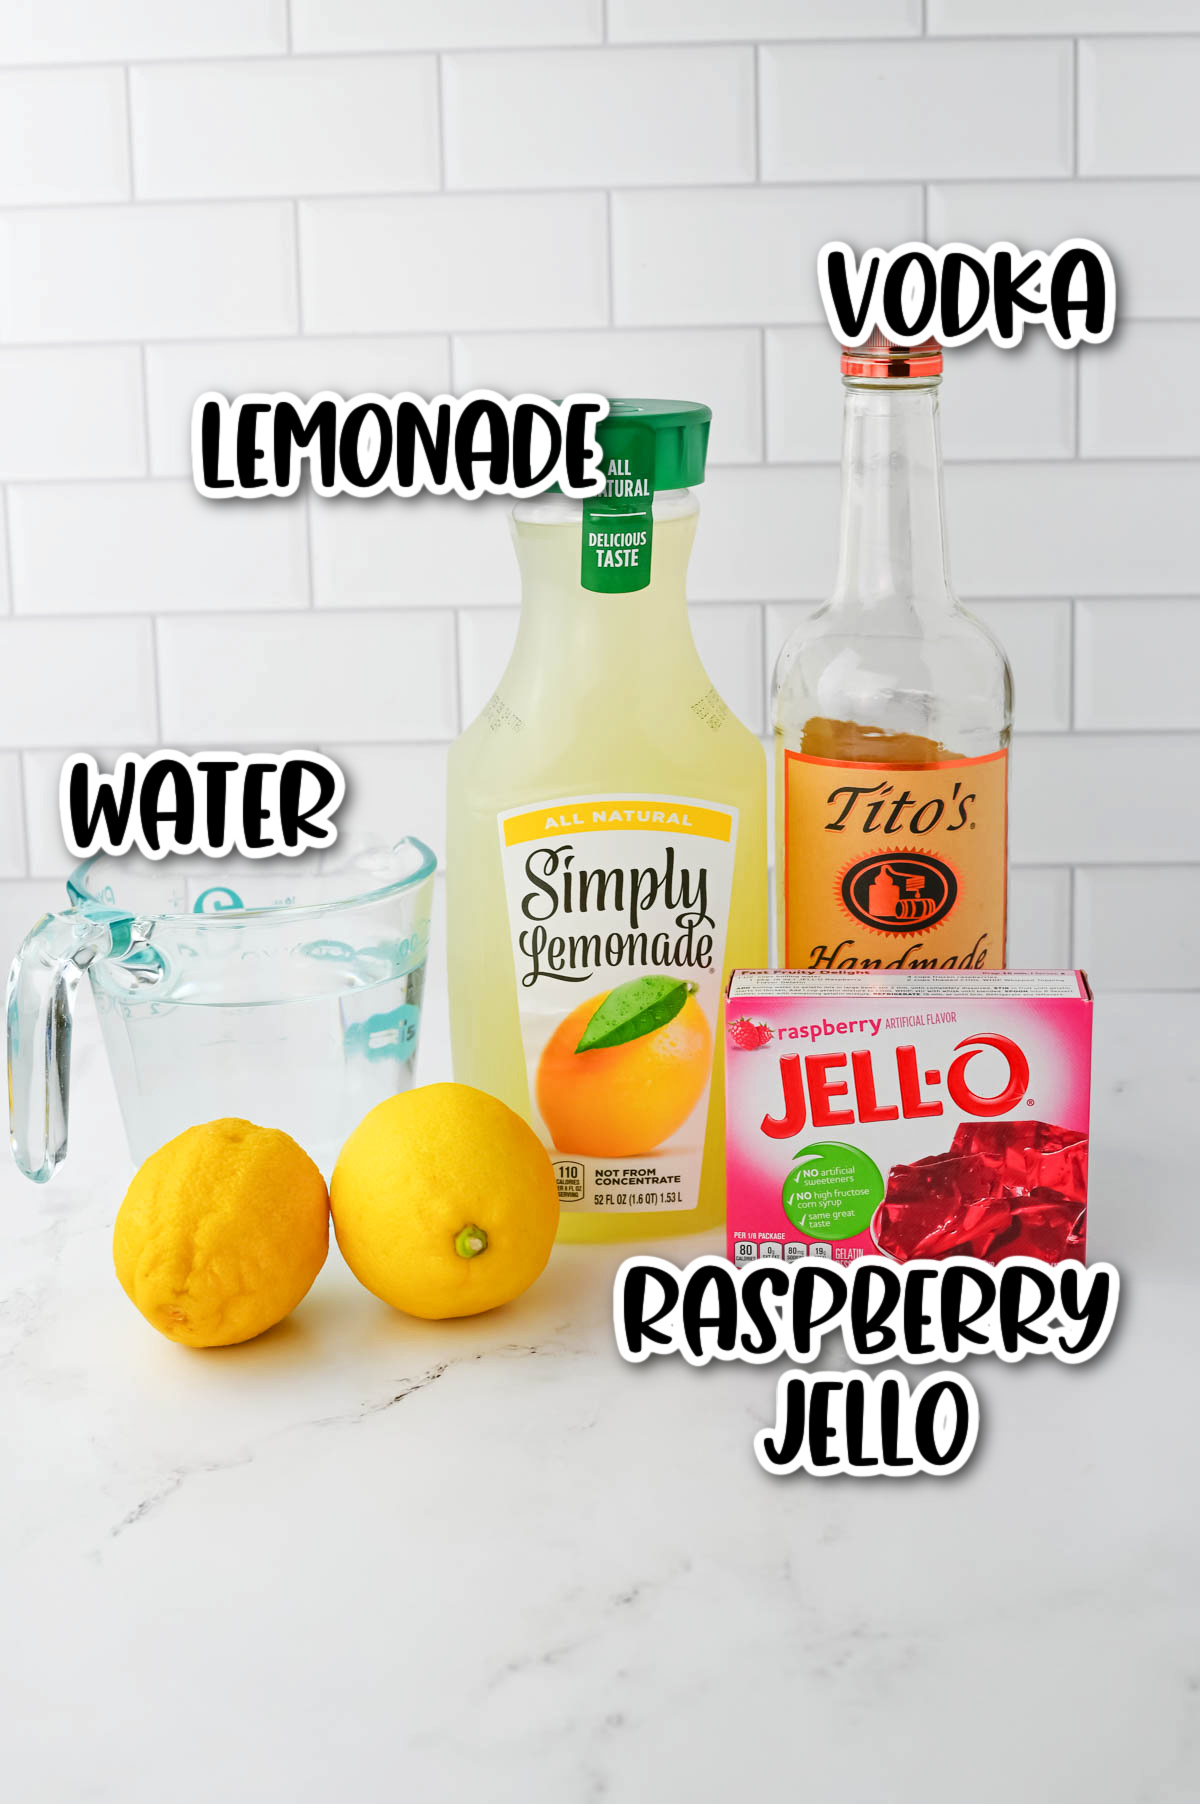 The ingredients for a raspberry lemonade.